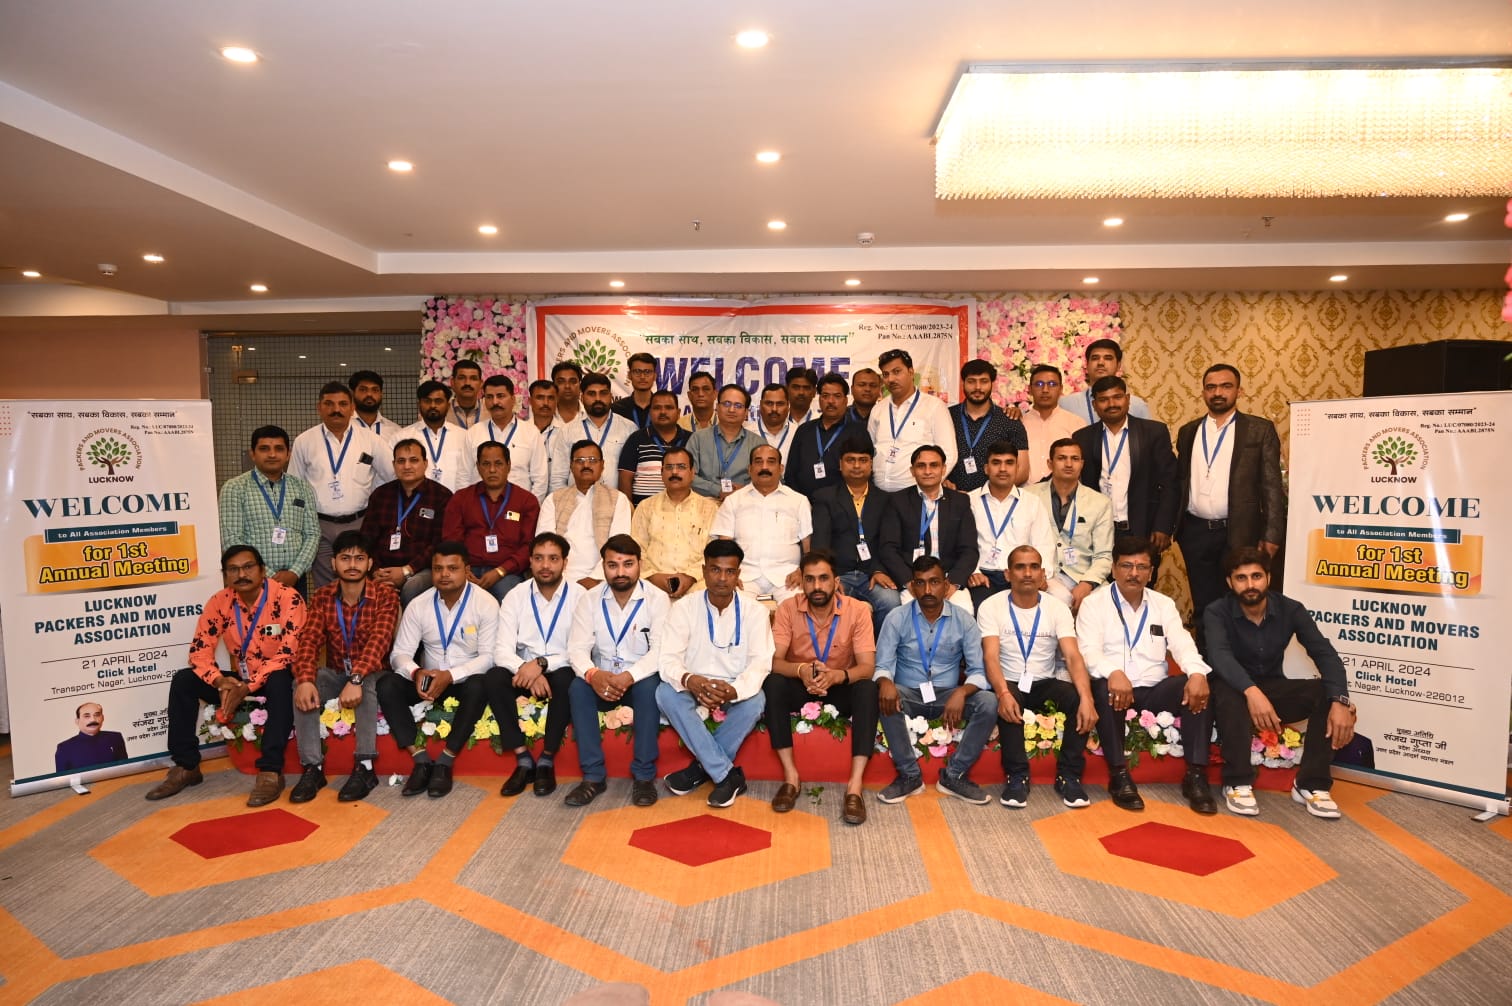 The first annual convention of "Lucknow Packers and Movers Association" was held at Transport Nagar.